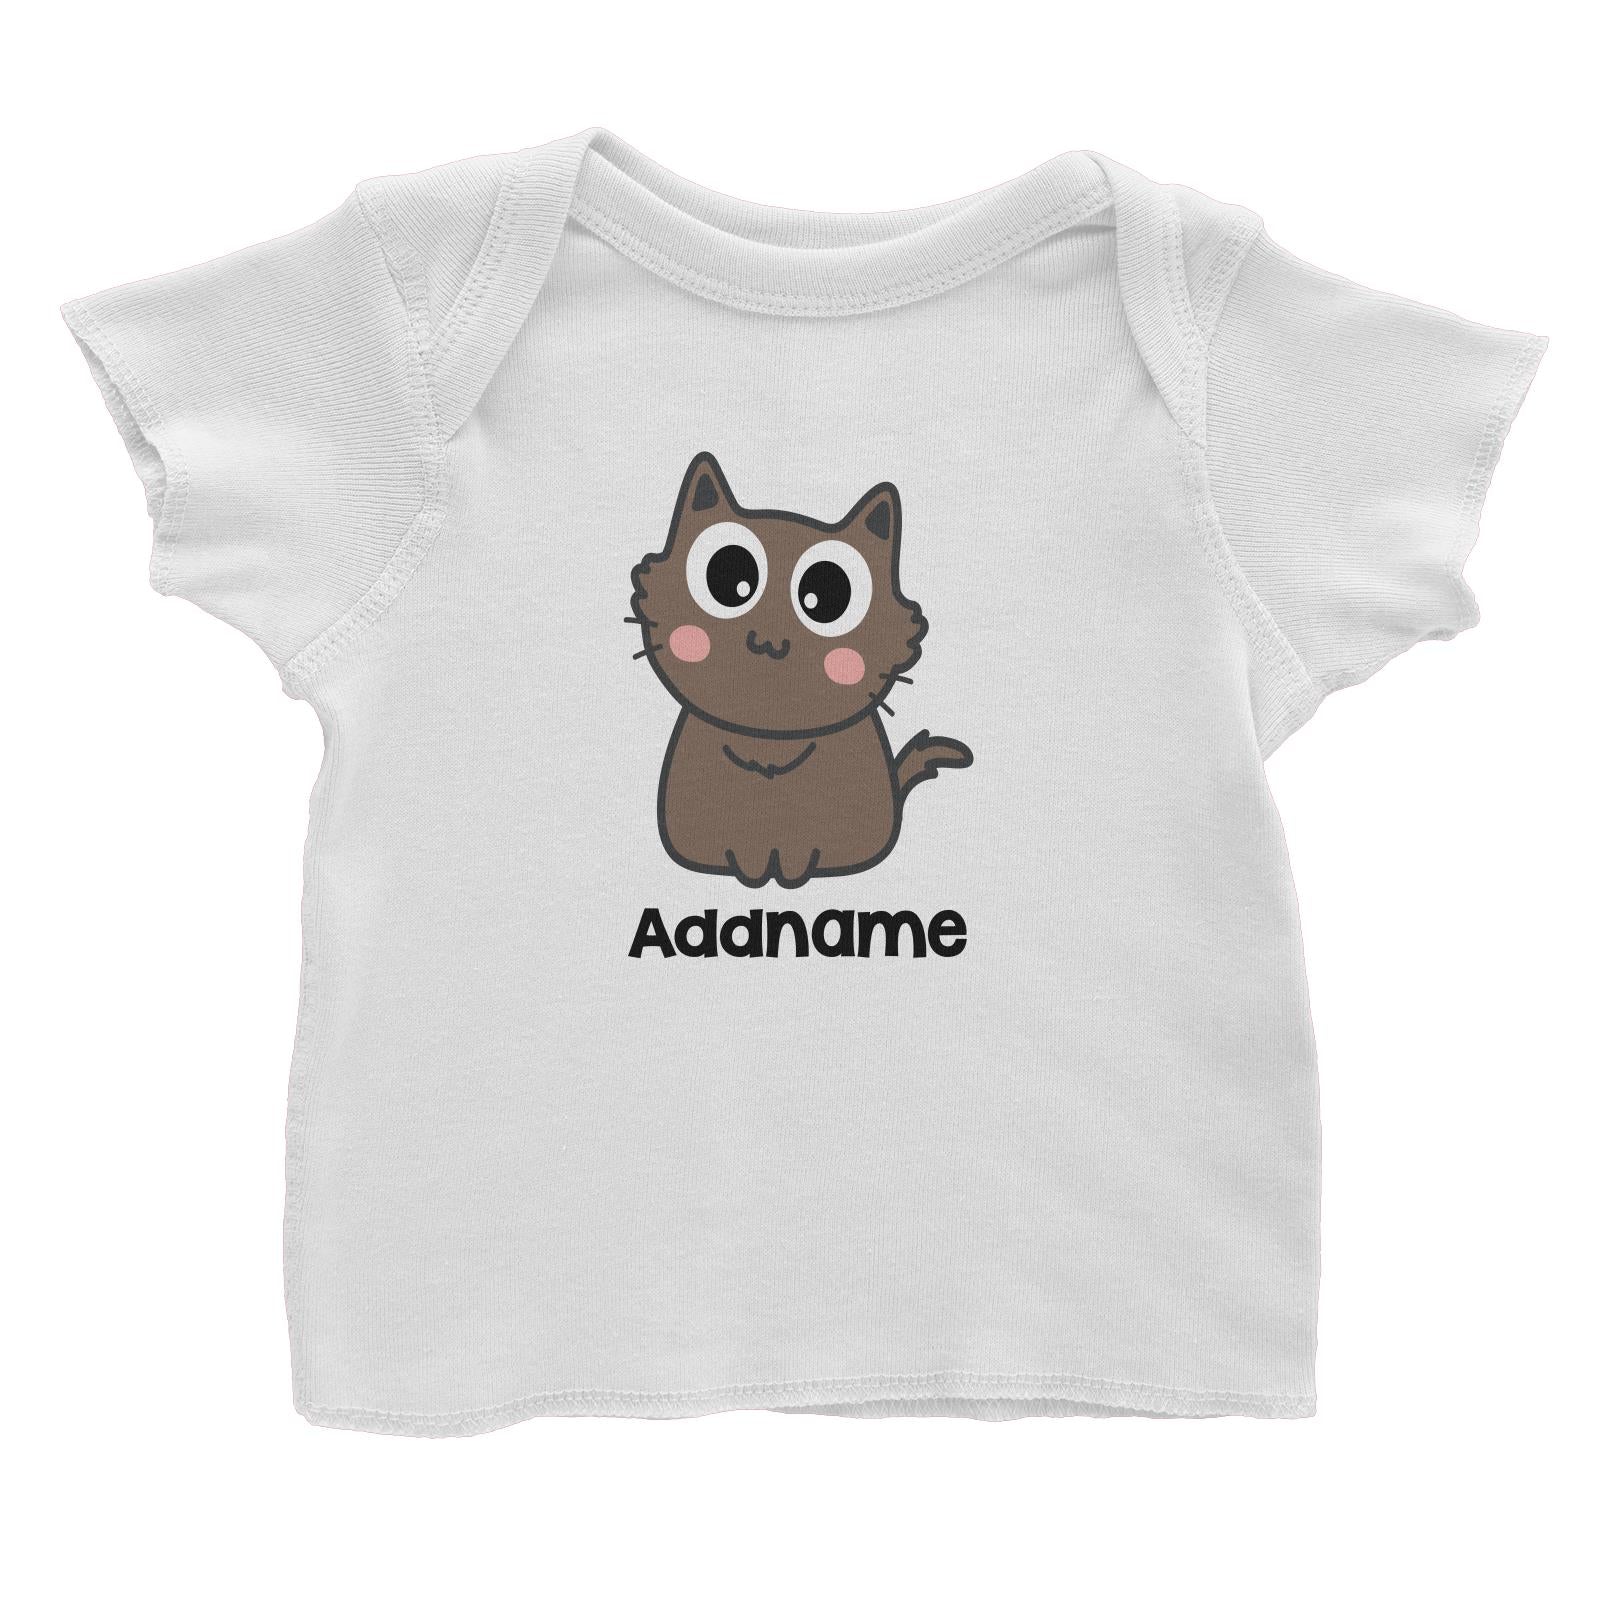 Drawn Adorable Cats Chocolate Addname Baby T-Shirt